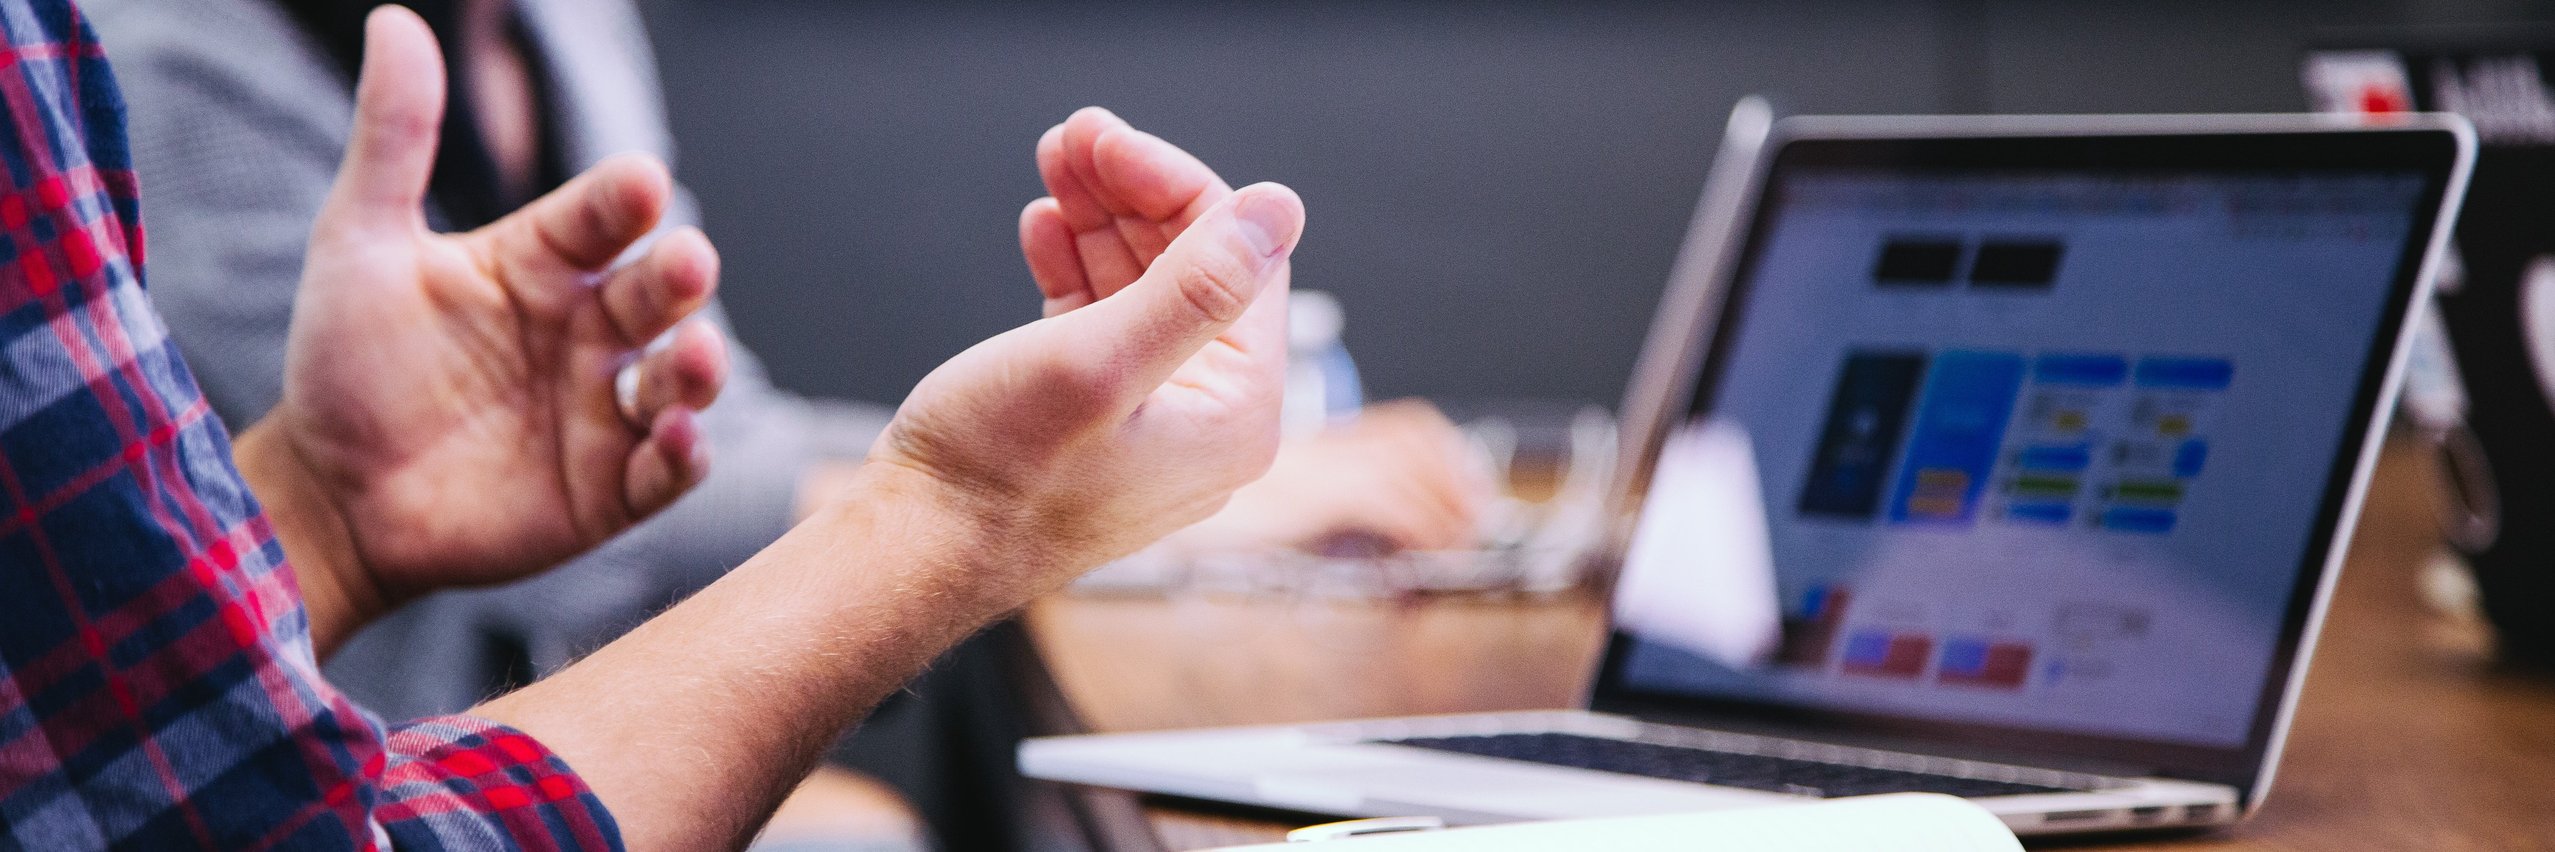 Male hands in a discussing pose in front of a laptop